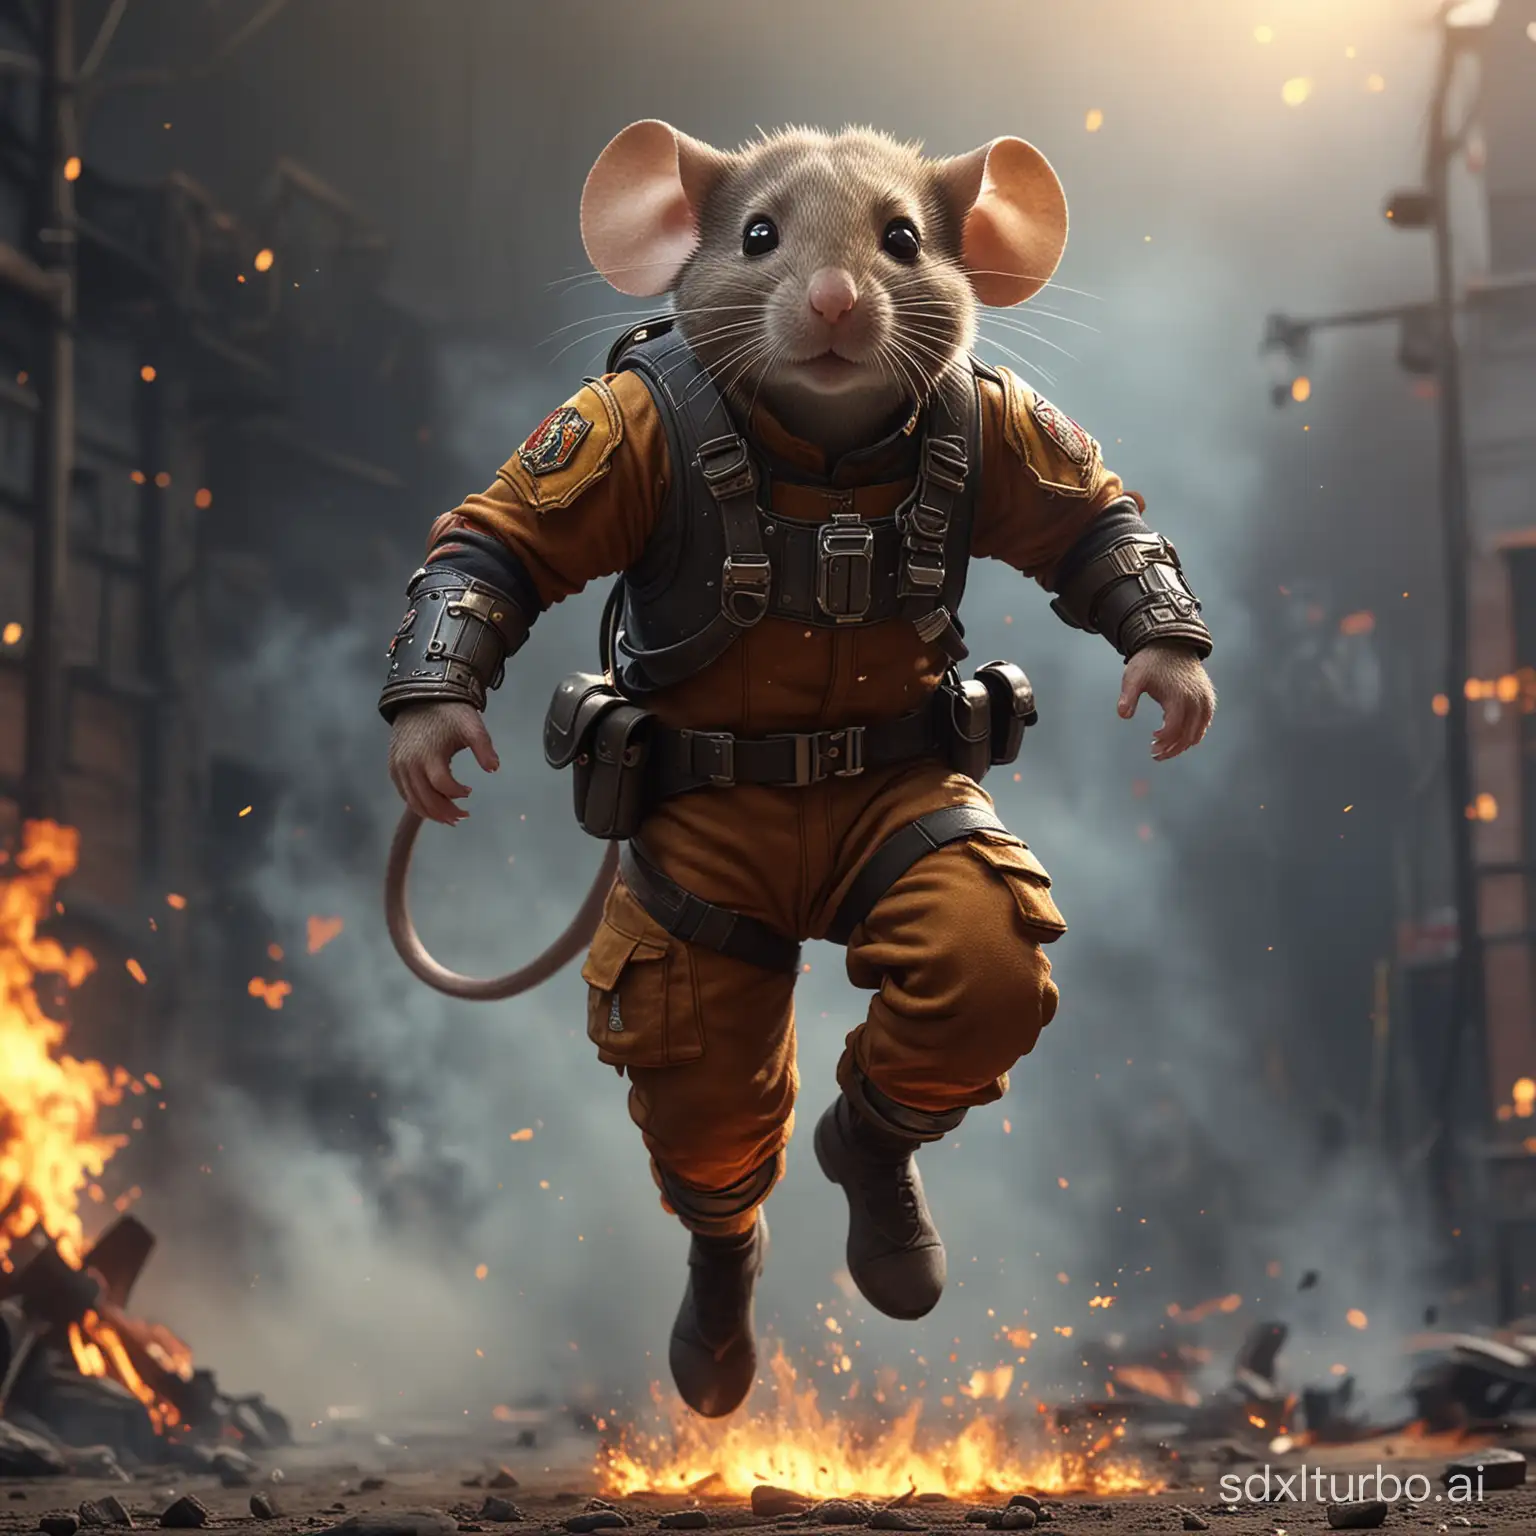 small mouse in human form, in the air, muscular, fighter, firefighter armor, 4k, photorealistic, cinematic lighting, fire in the background